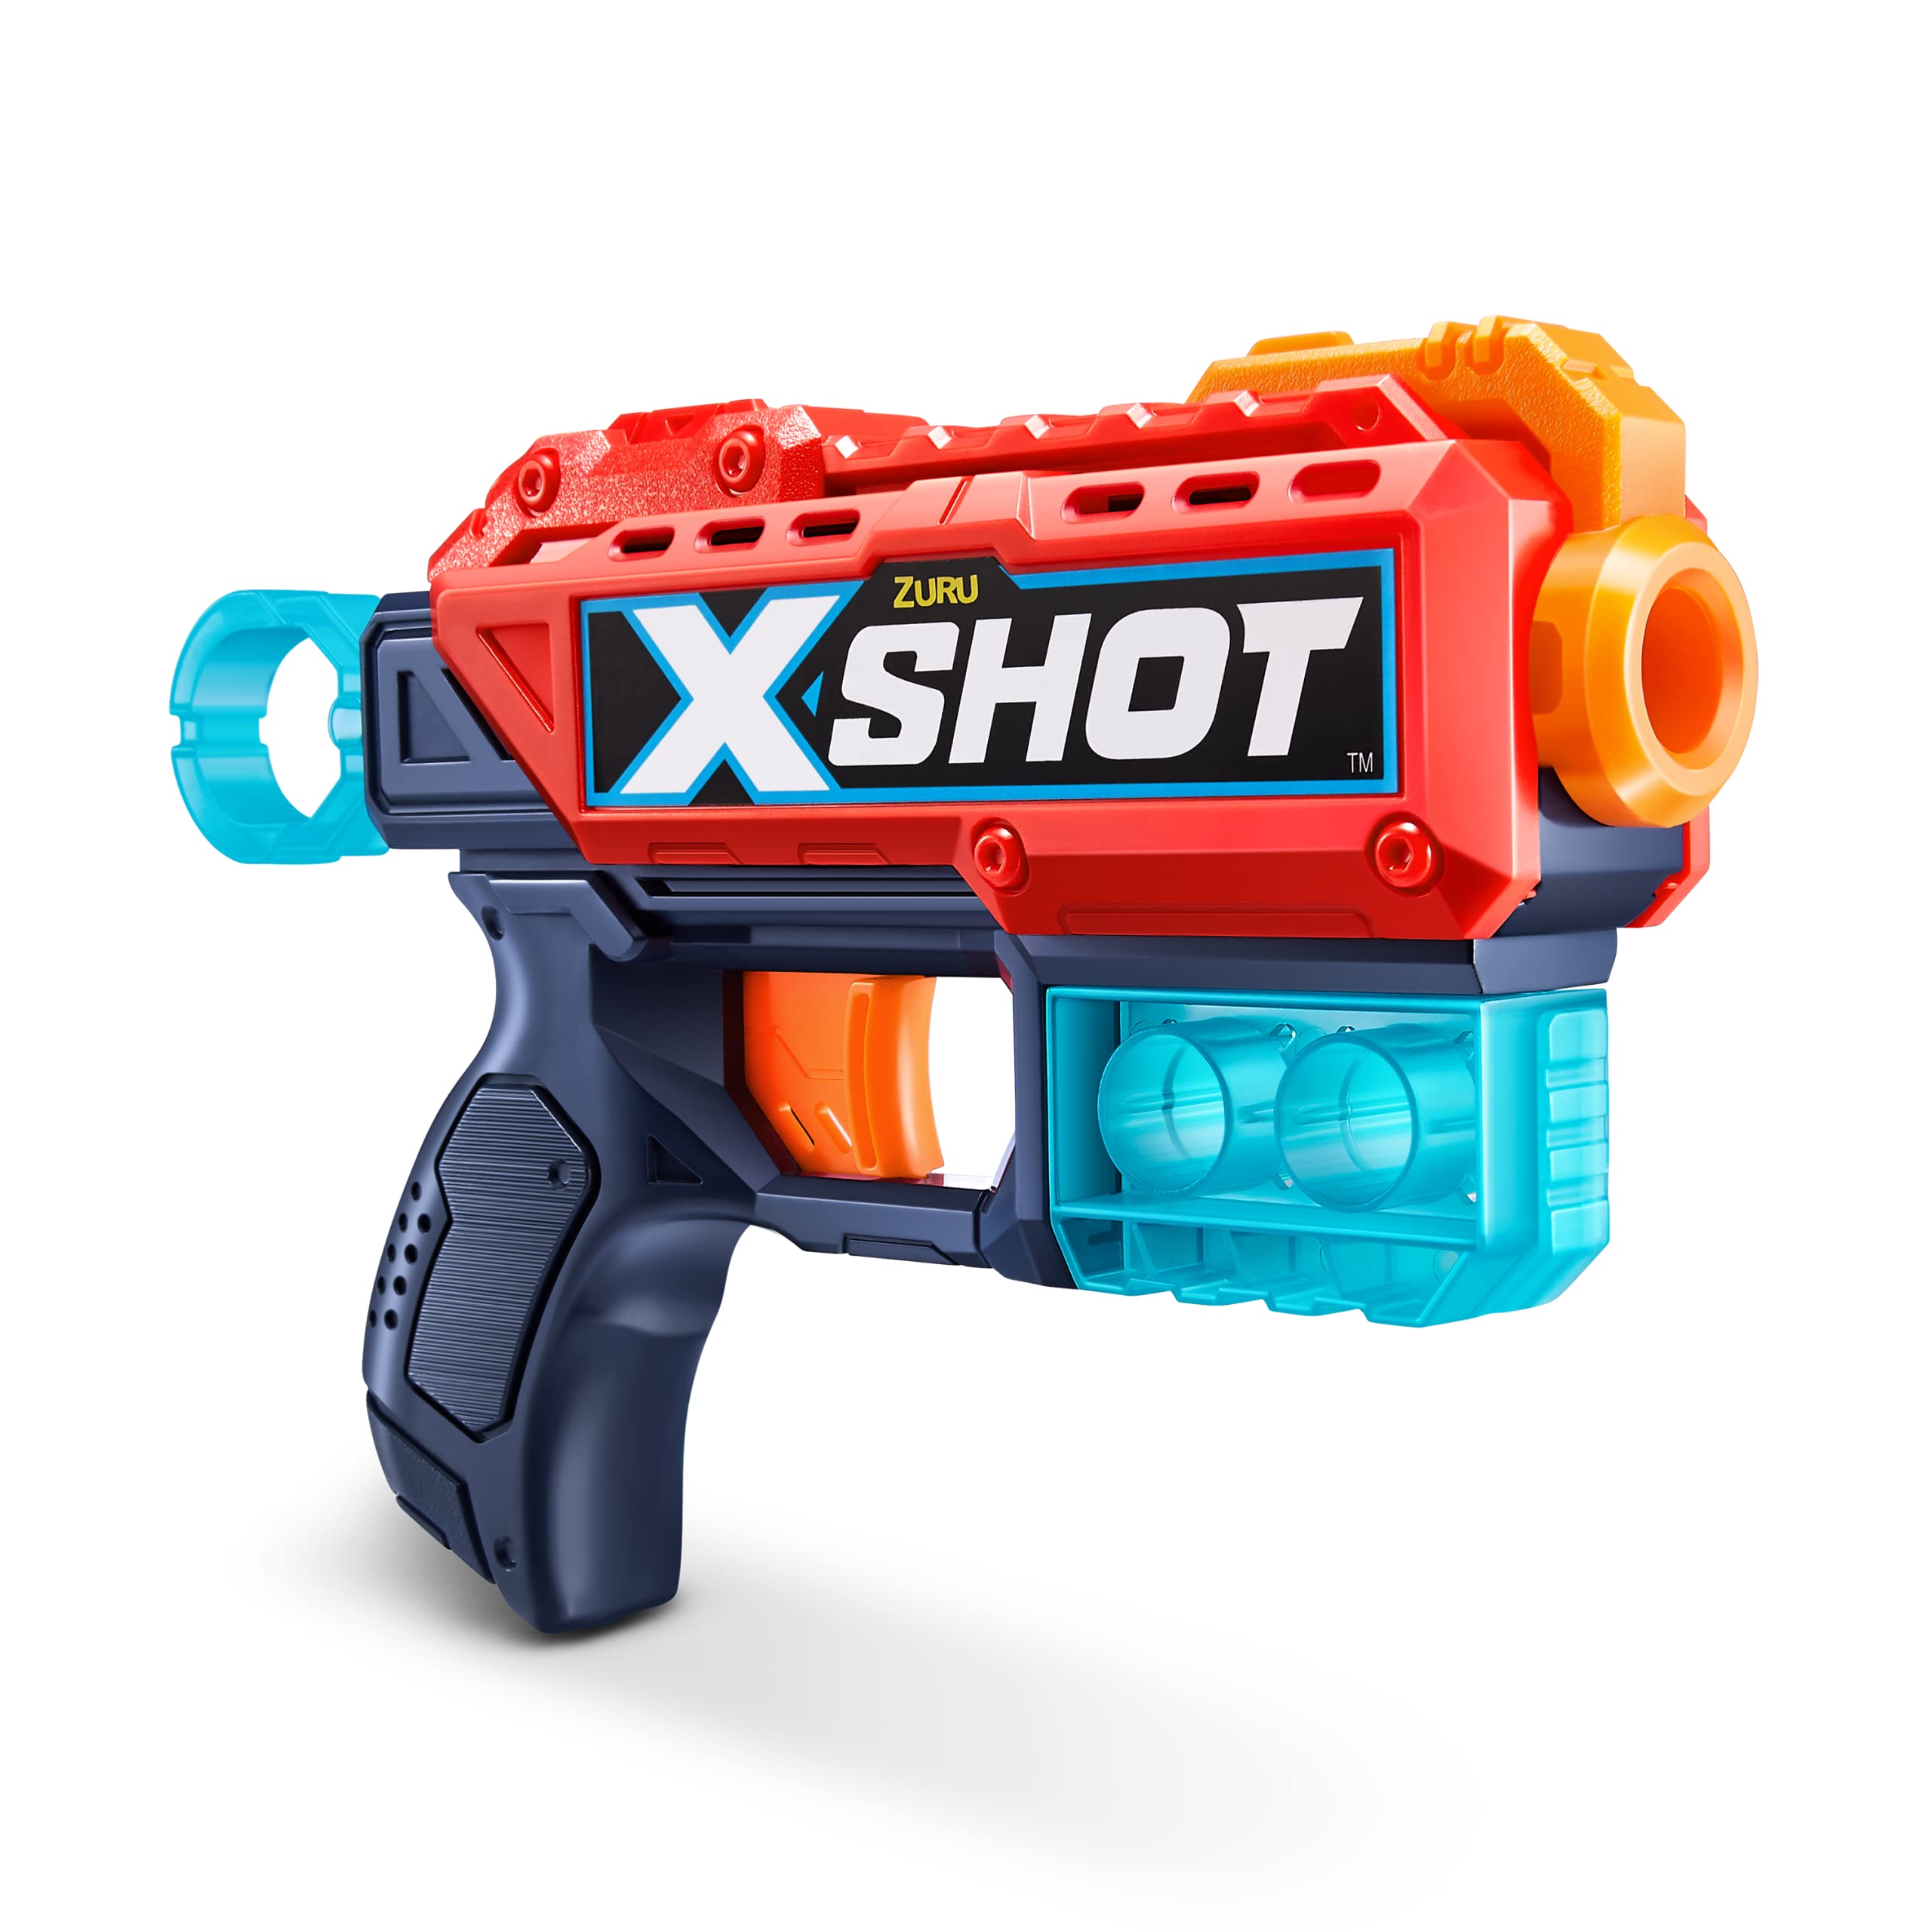 X-Shot Excel Double Kickback Red Foam Dart Blaster Combo Pack (6 Shooting Targets + 8 Darts) $5.67 + Free Shipping w/ Prime or on orders over $25